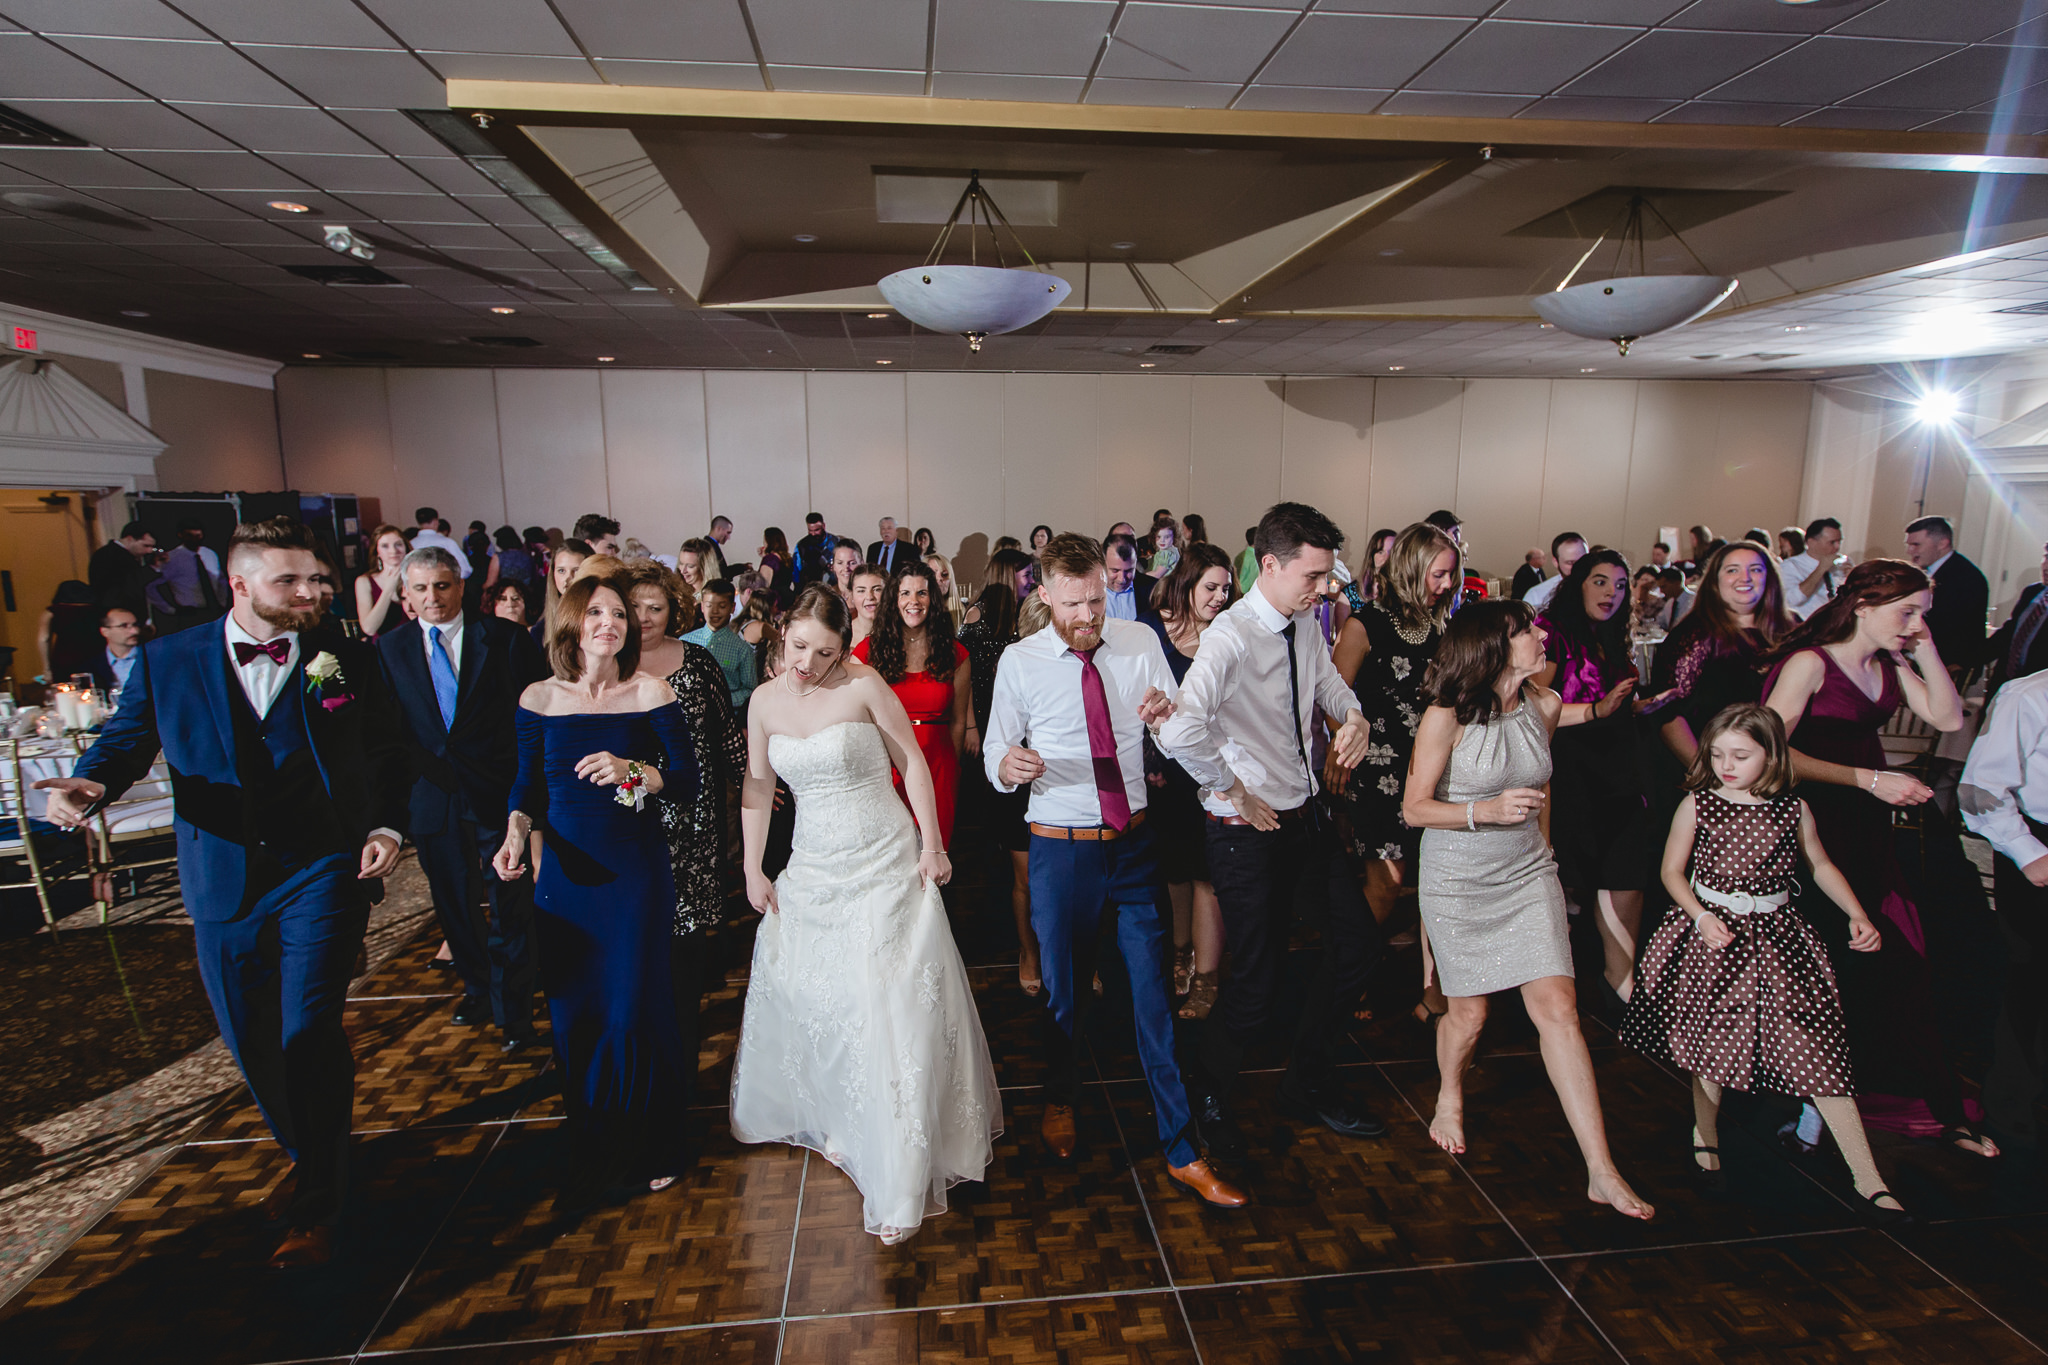 Wedding guests doing a line dance at the Chadwick